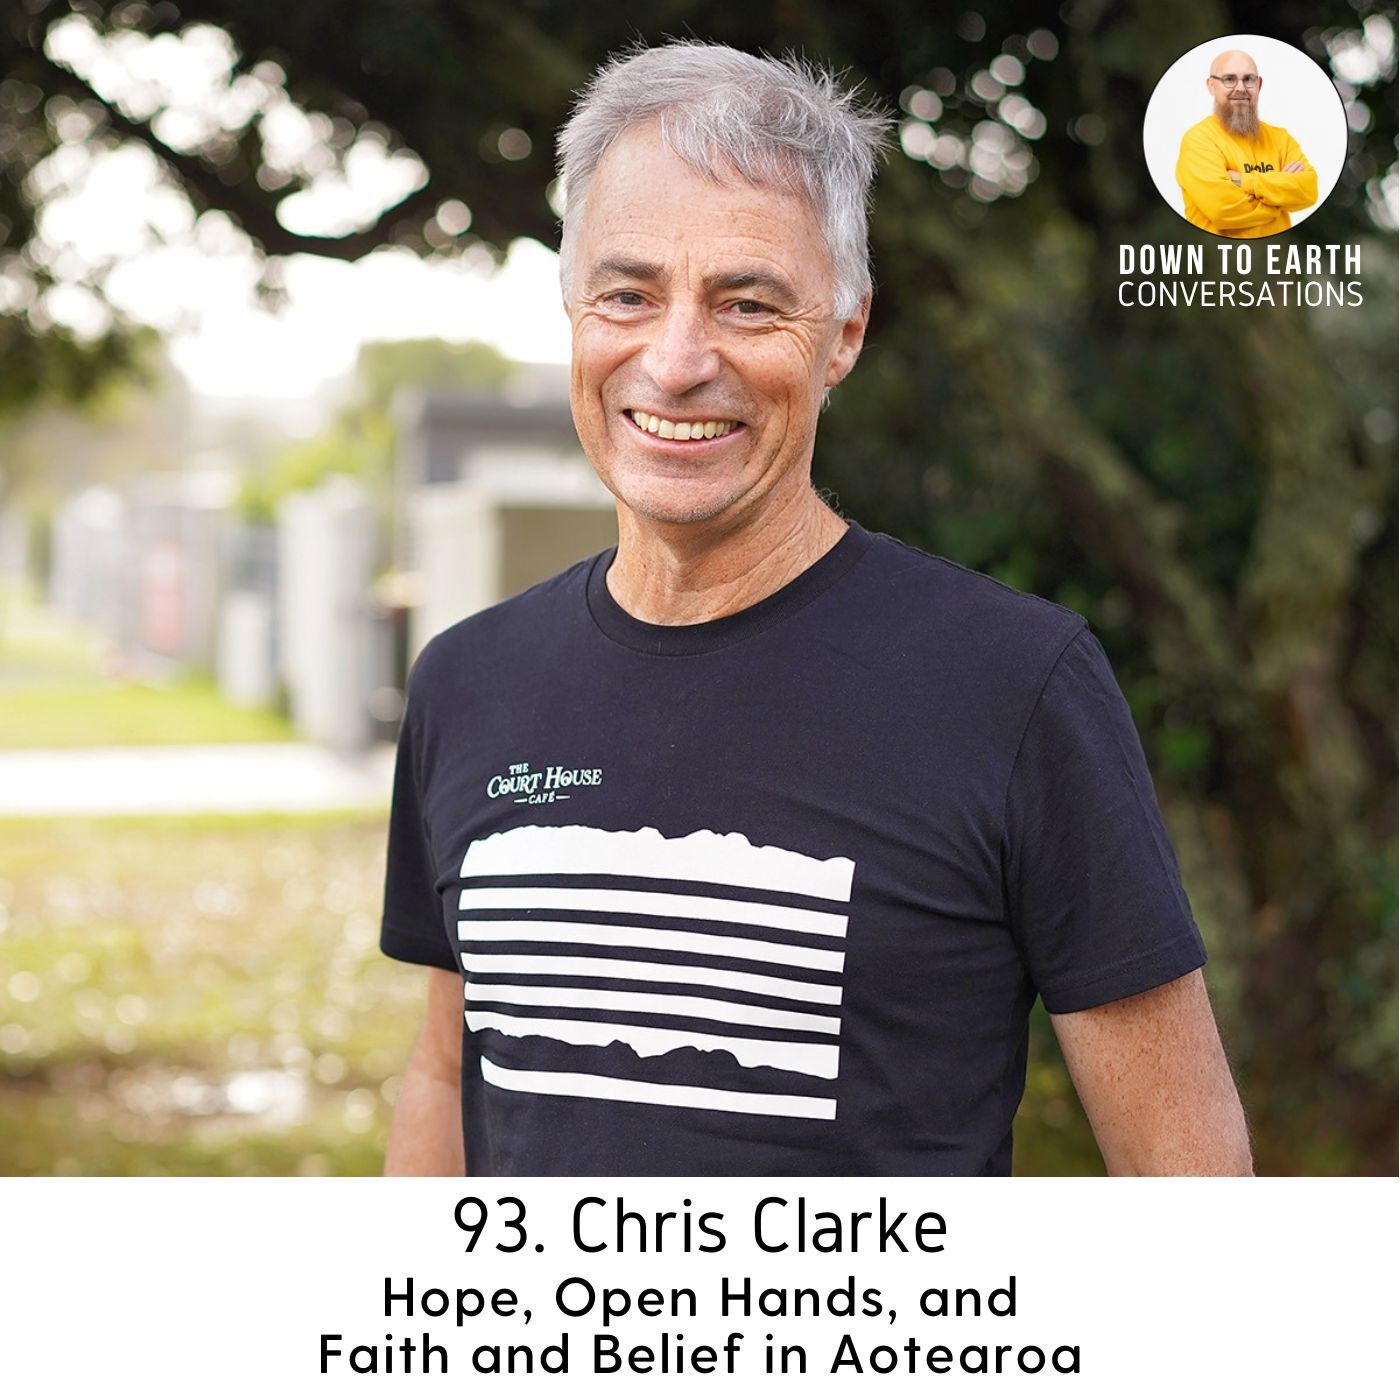 93. Chris Clarke - Hope, Open Hands, and Faith and Belief in Aotearoa